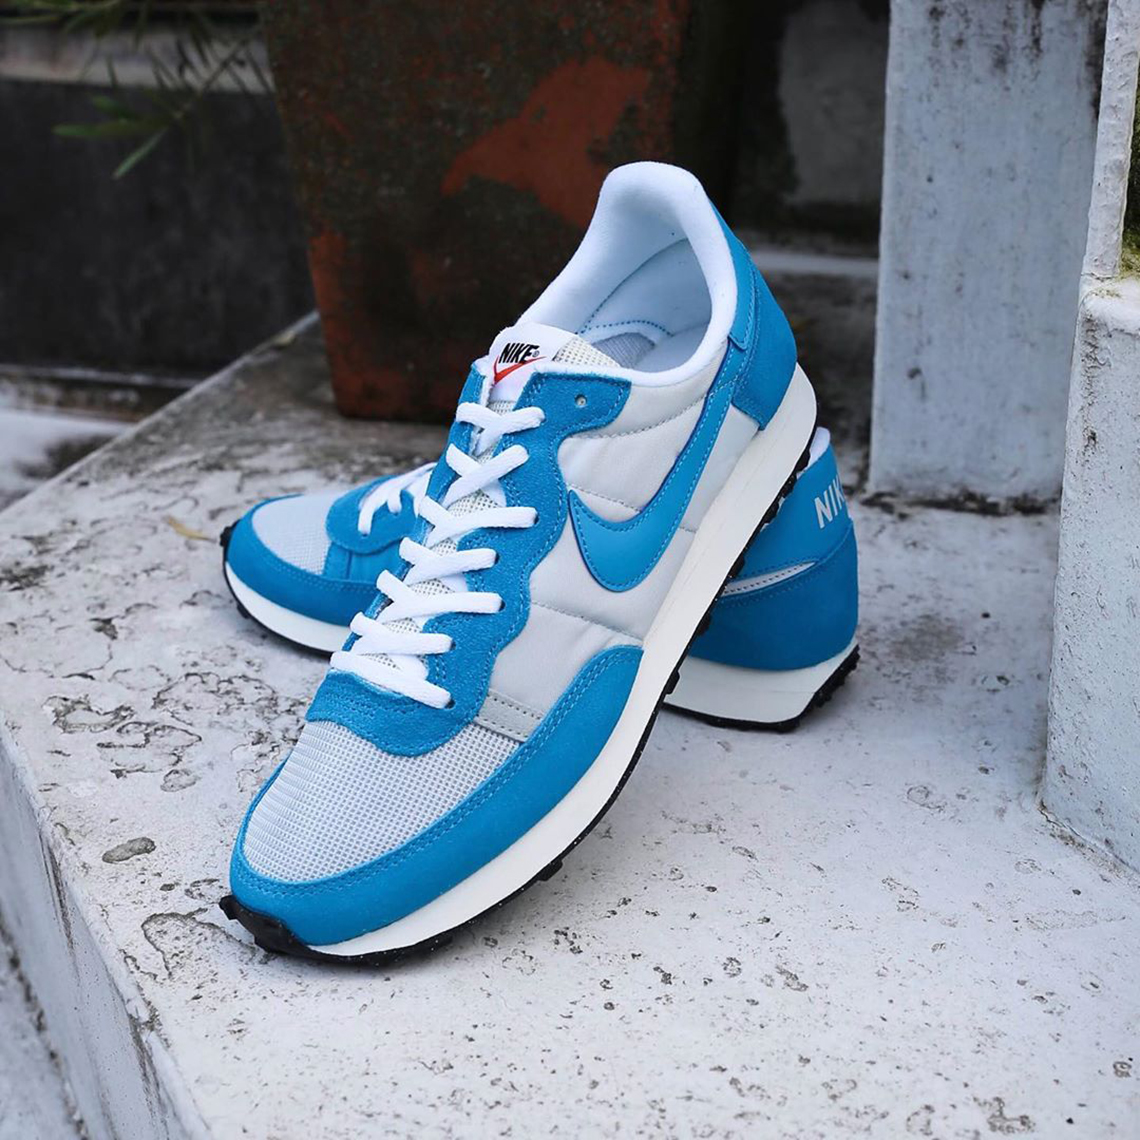 Nike Challenger UNC CW7645-001 Release Date | SneakerNews.com